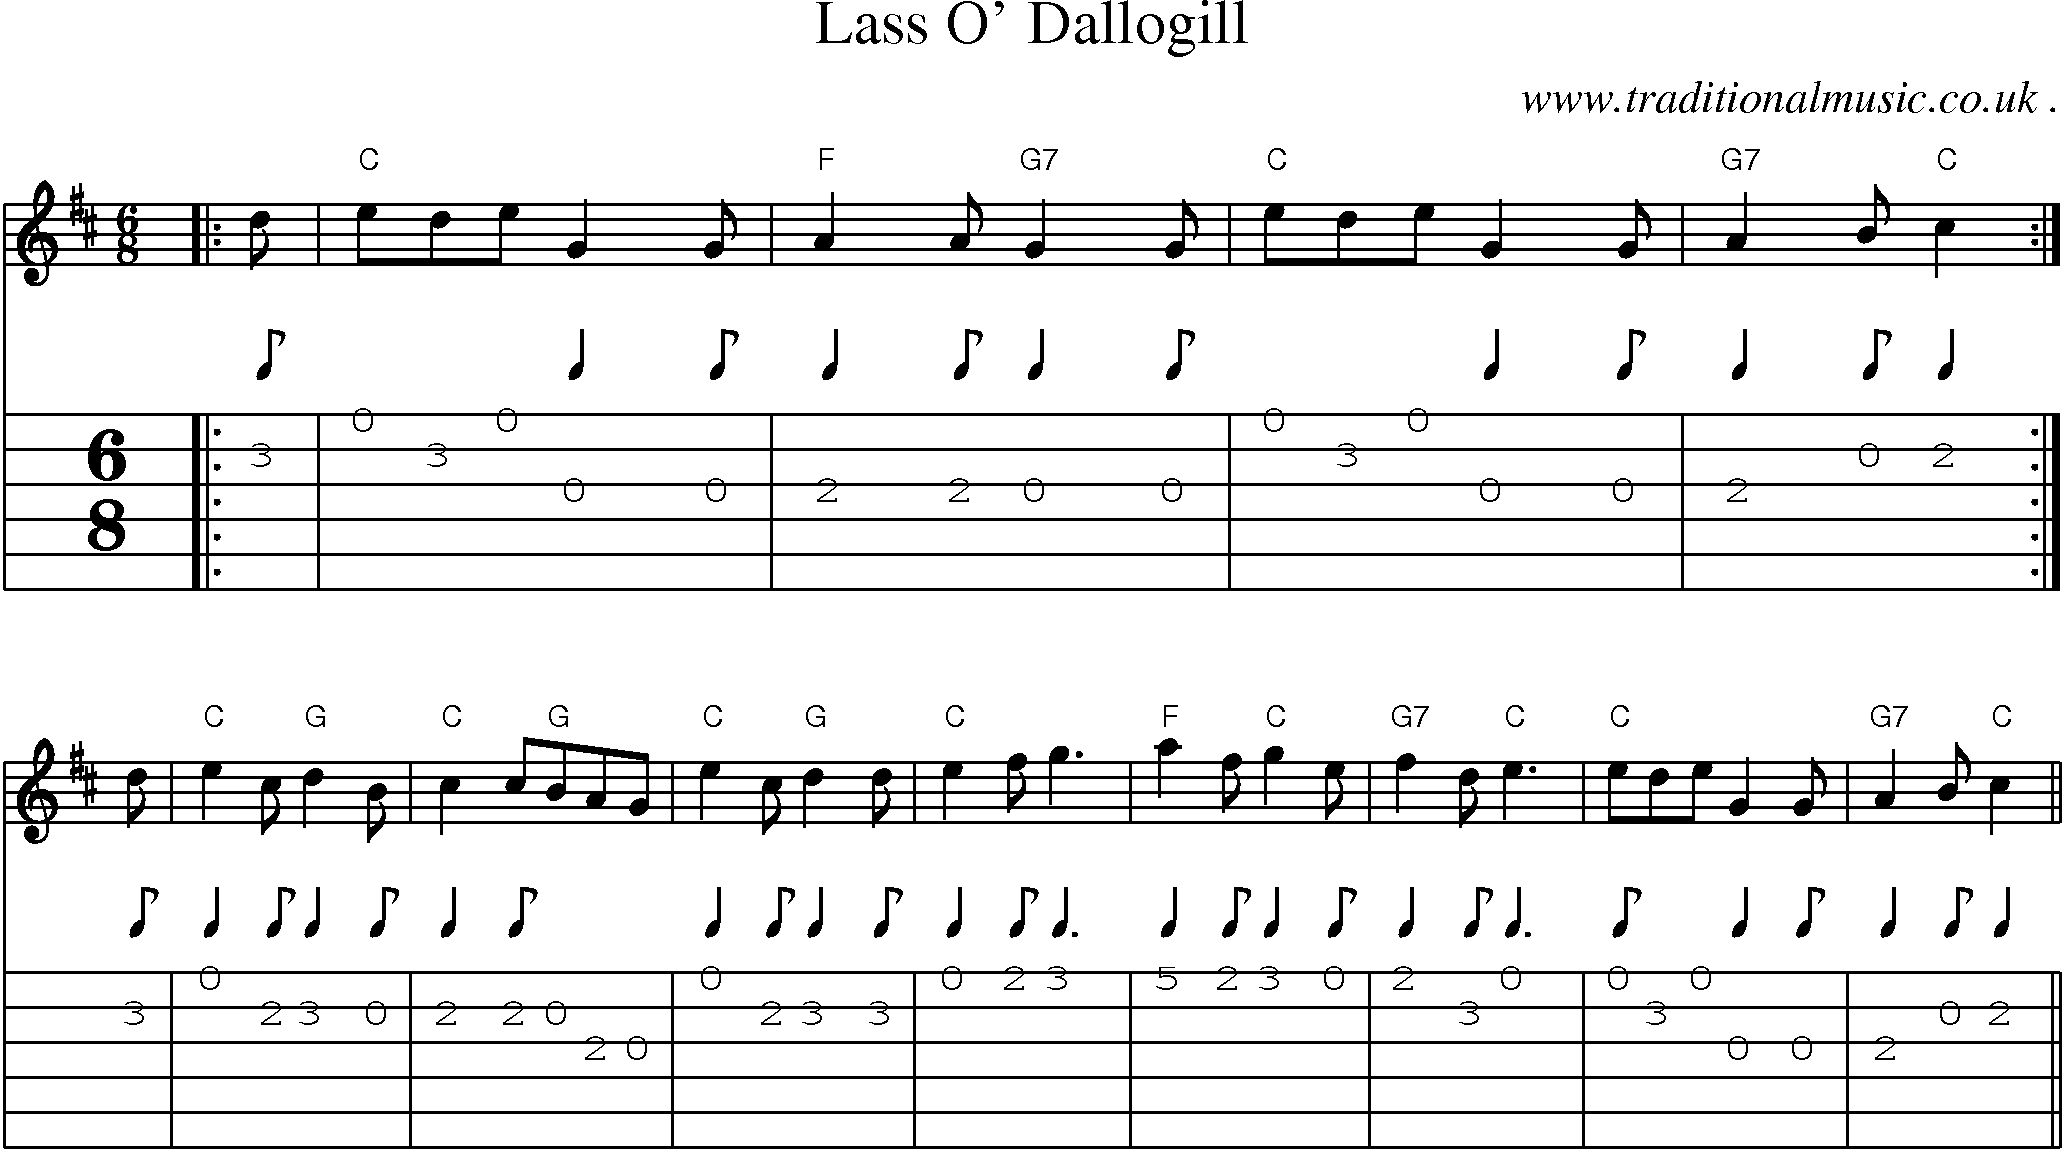 Sheet-Music and Guitar Tabs for Lass O Dallogill